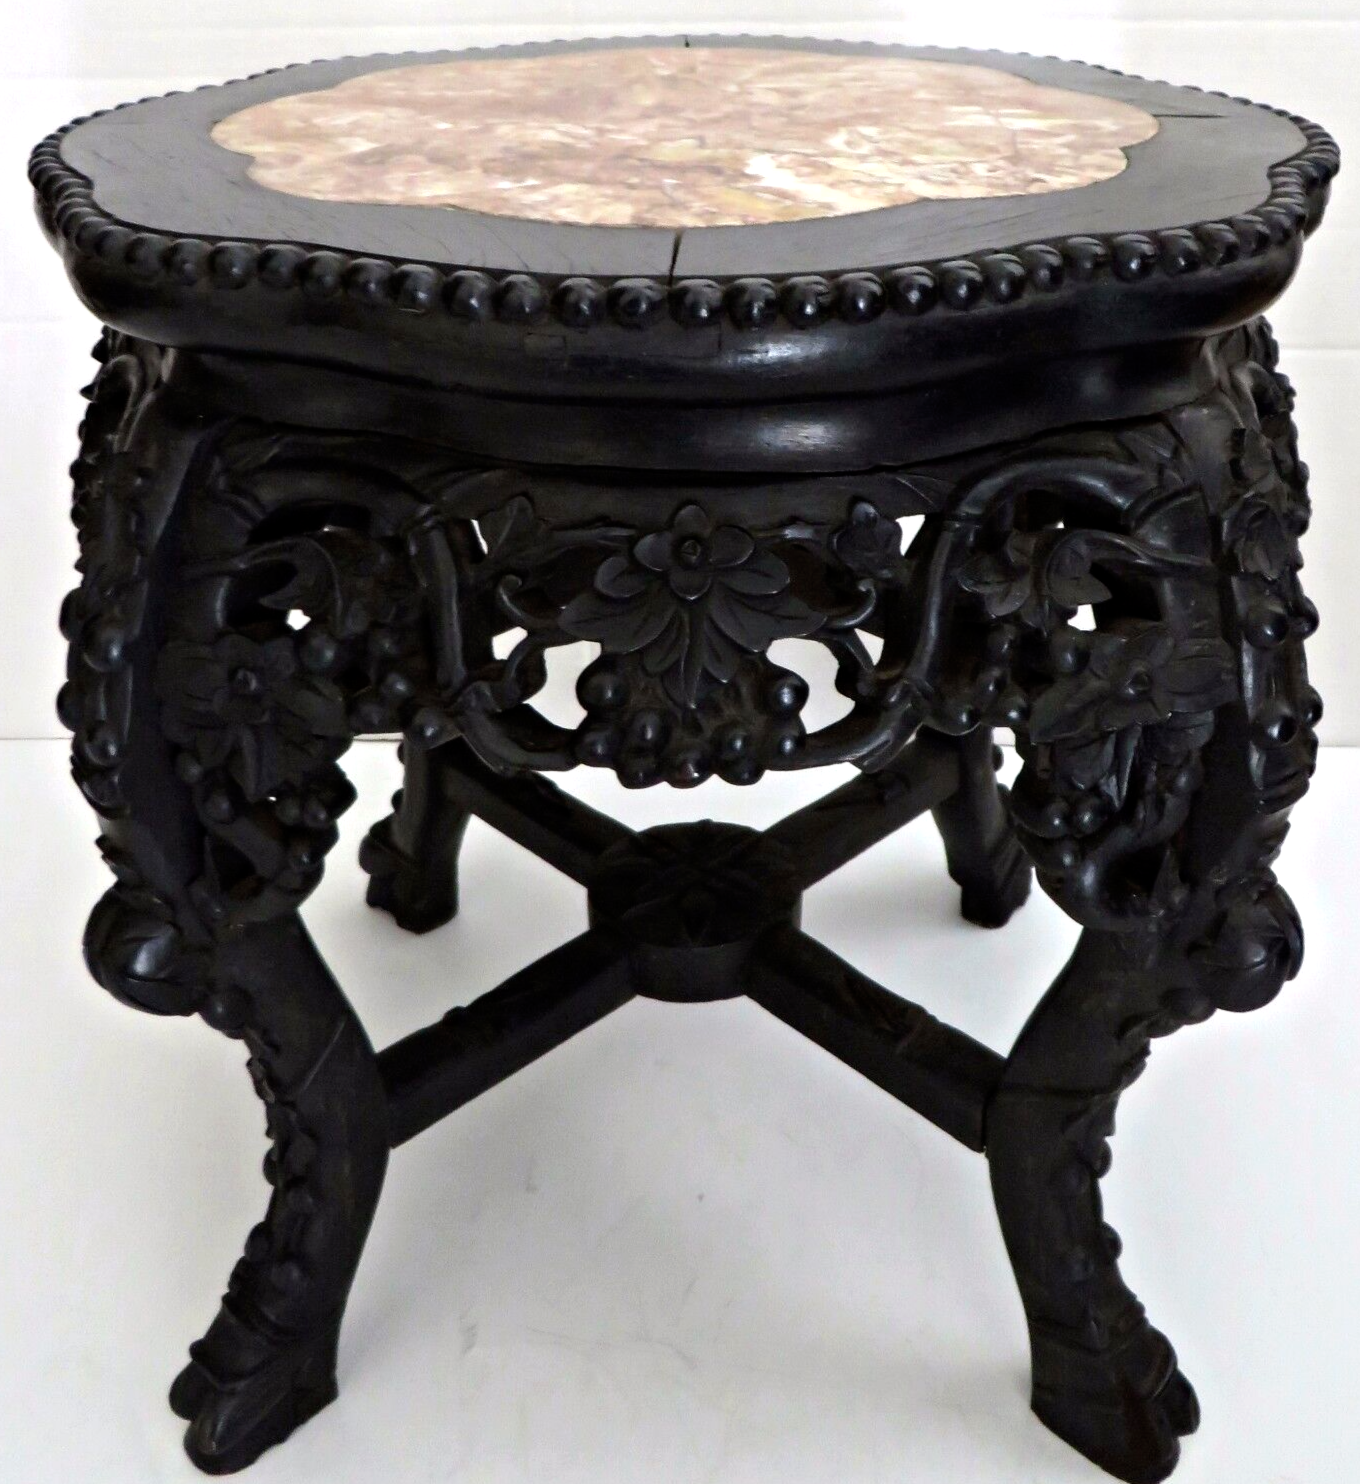 Antique 1870's Oriental Chinese Carved Wood Marble Top Side Table Plant Stand Без бренда - фотография #3